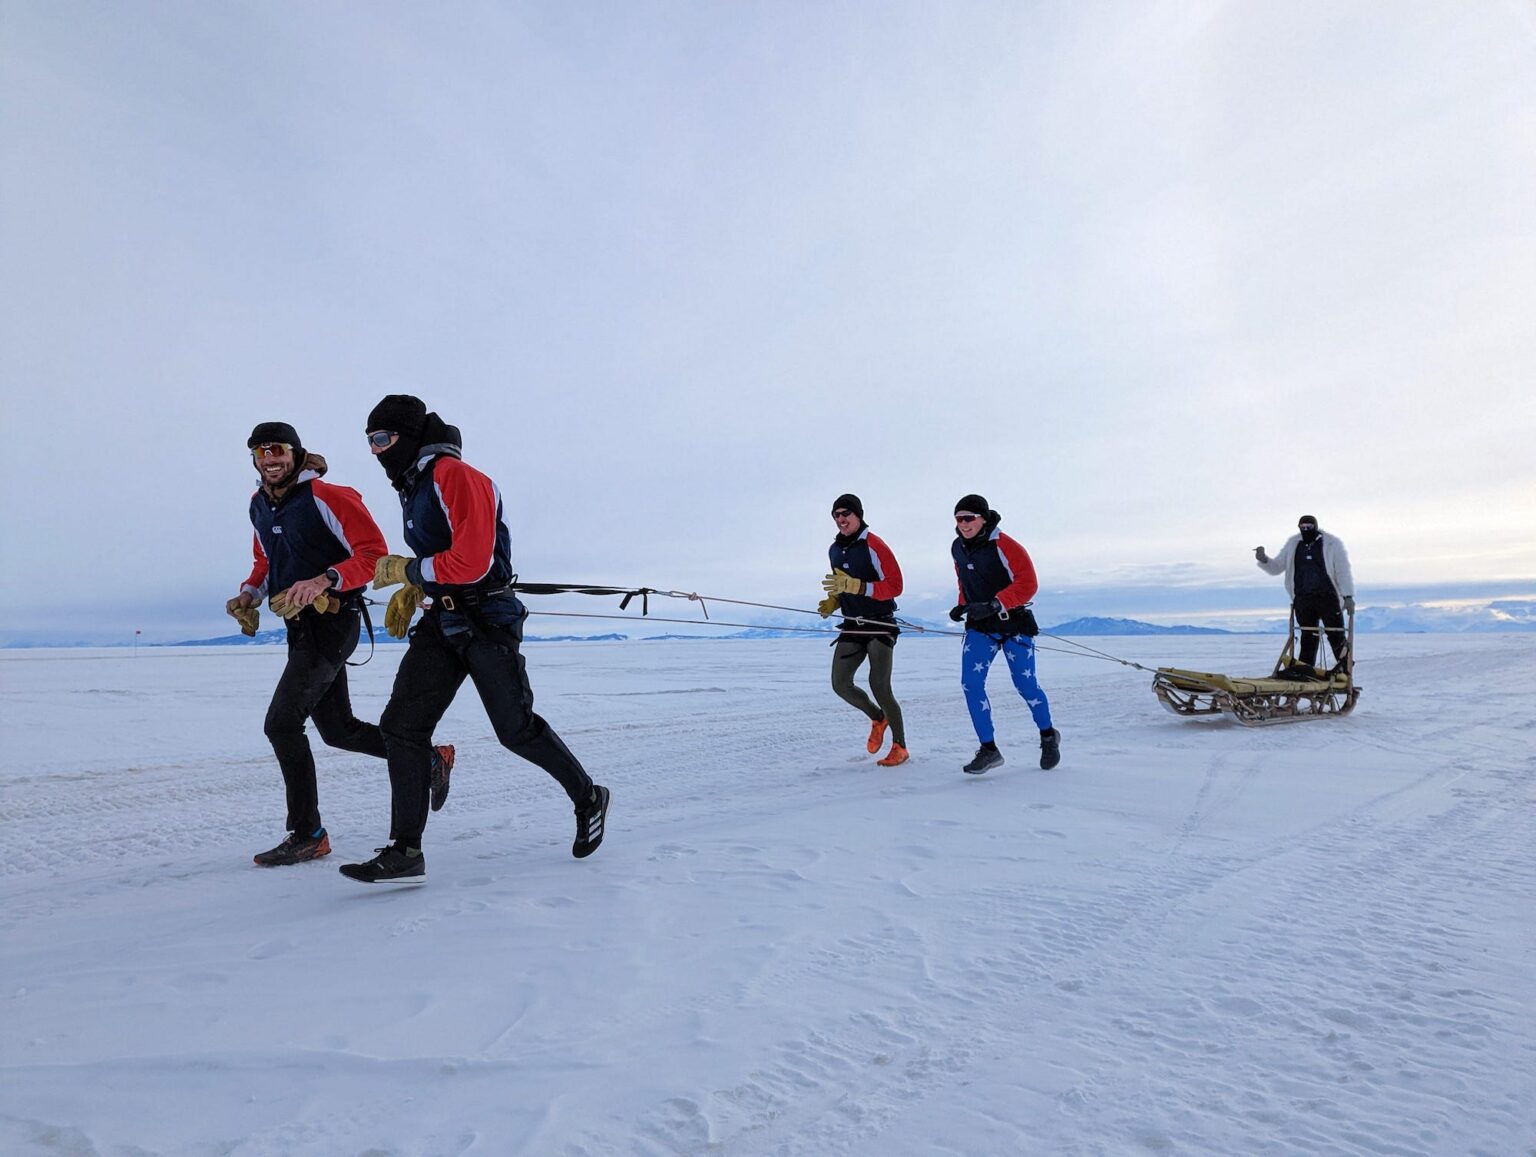 Participating in a 5-km man-hauling competition on the Ross Ice Shelf - USA vs. New Zealand.